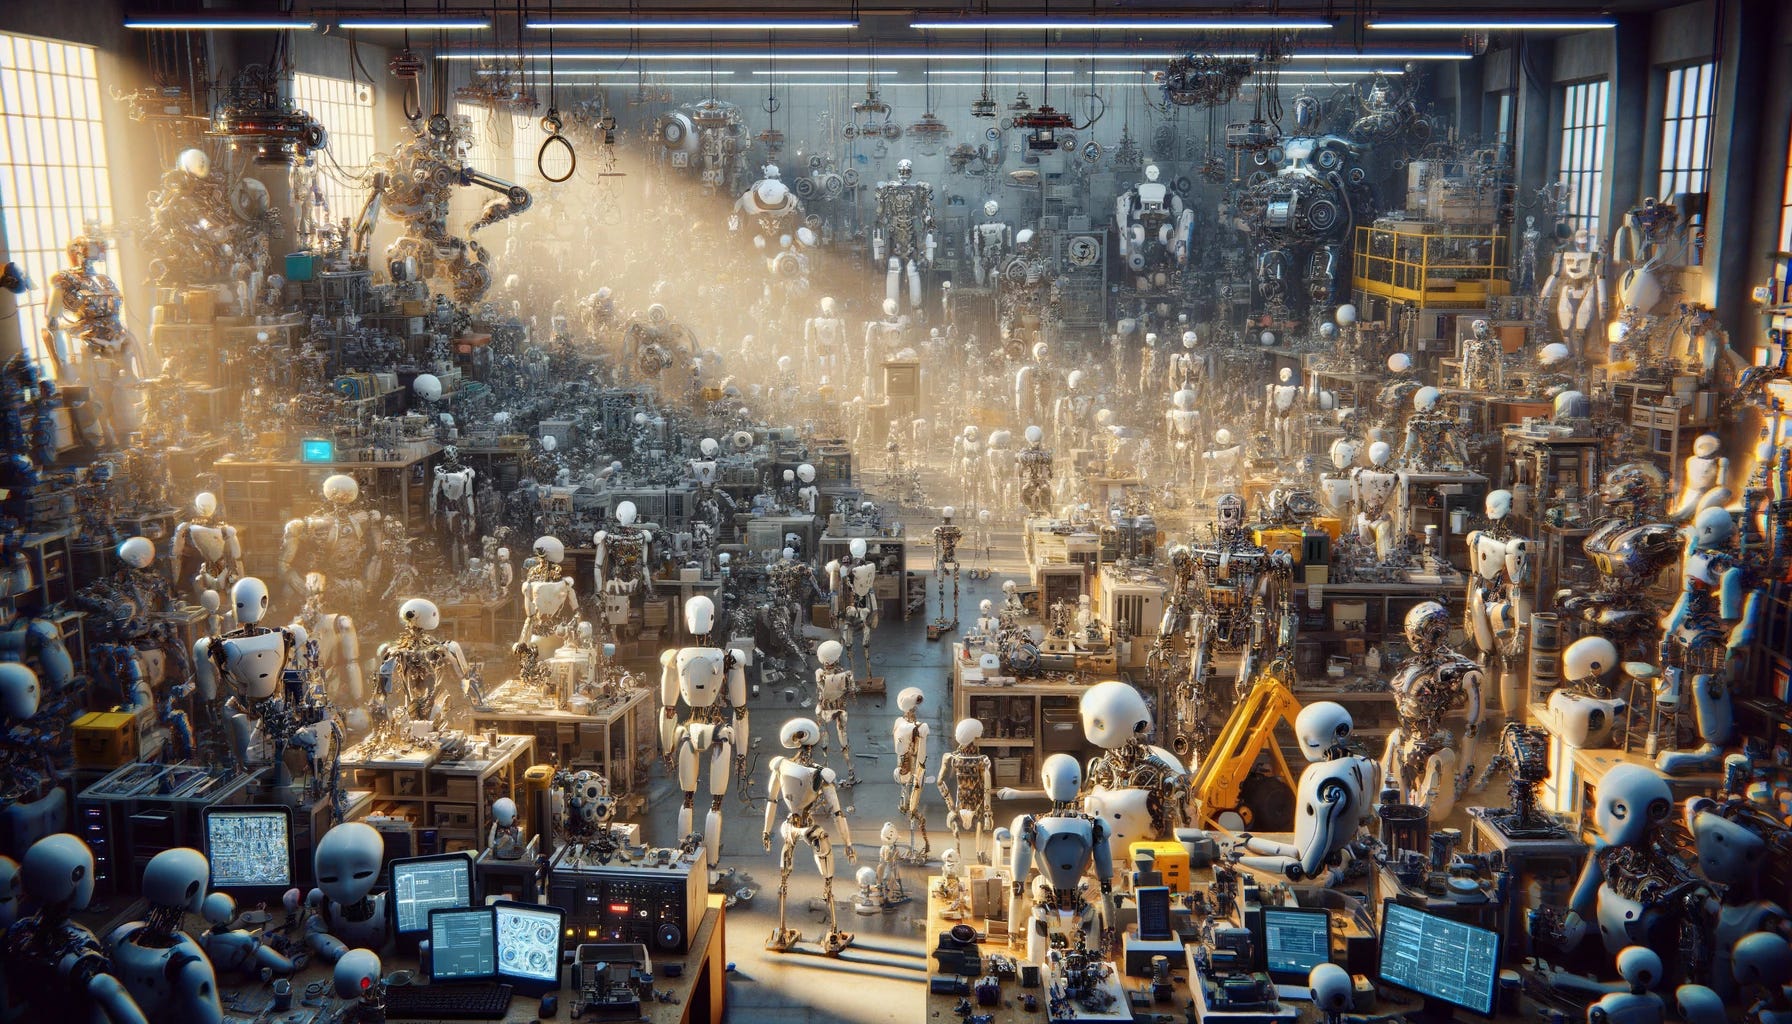 Create a landscape-oriented image depicting a room overcrowded with AI robot constructs. The scene should capture the chaos and clutter of numerous robots of different designs and sizes crammed into a small space. These AI constructs range from humanoid to abstract shapes, all showcasing various stages of activity and functionality. The room itself appears to be a workshop or a lab, filled with tools, parts, and digital screens, indicating ongoing work and experimentation. The environment should convey a sense of technological advancement but also the overwhelming nature of dealing with so many AI constructs in one confined space. Lighting should highlight the complexity and detail of the robots, creating a dynamic and visually interesting scene that emphasizes the crowded, chaotic atmosphere.